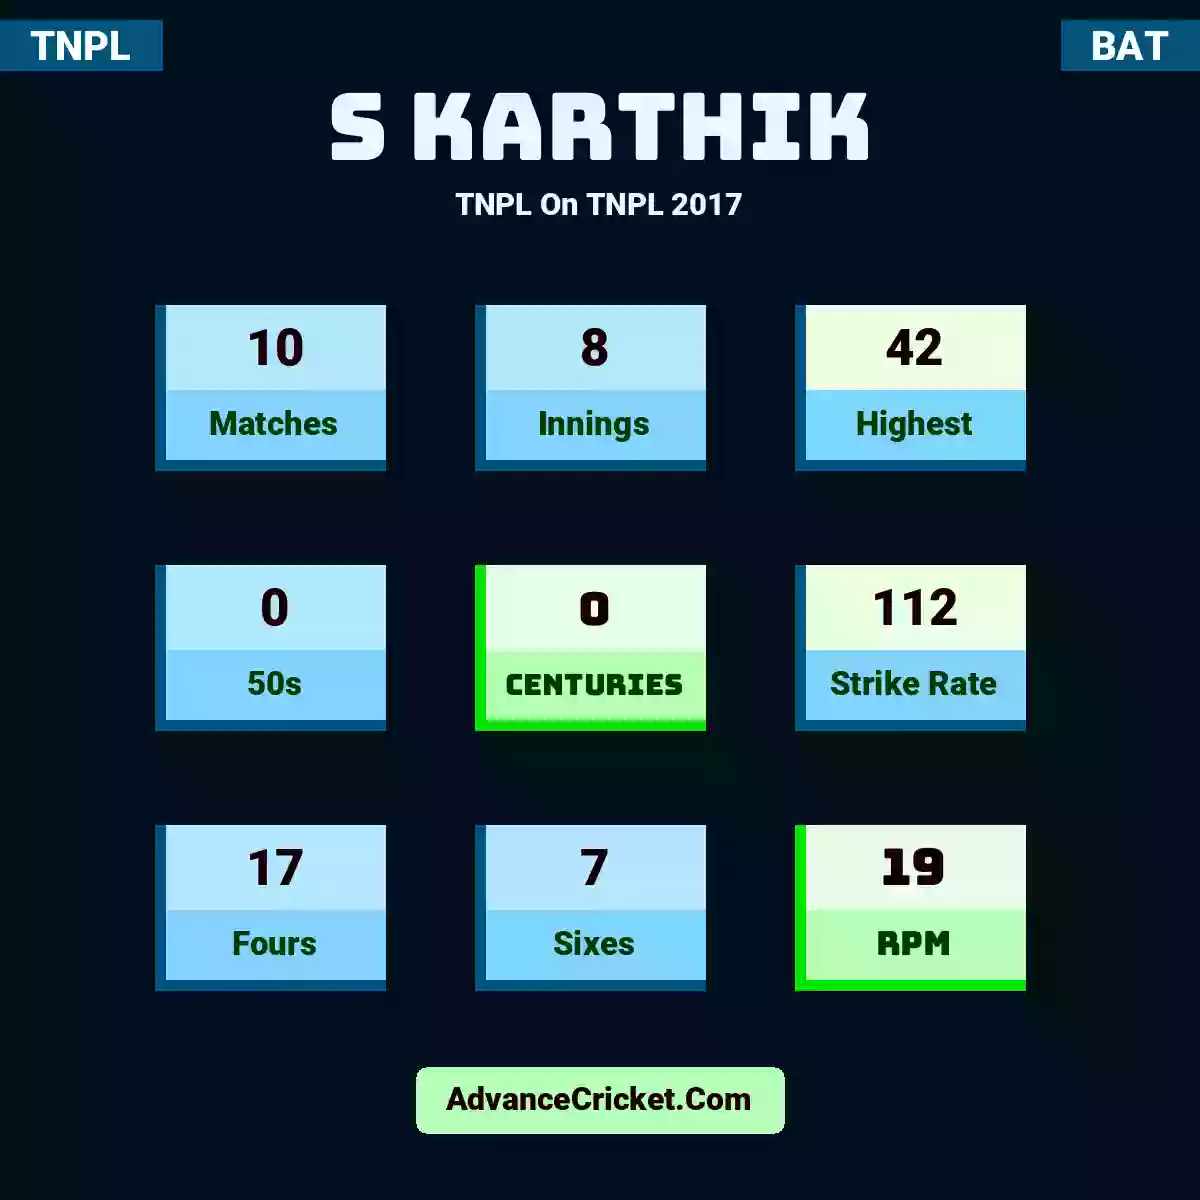 S Karthik TNPL  On TNPL 2017, S Karthik played 10 matches, scored 42 runs as highest, 0 half-centuries, and 0 centuries, with a strike rate of 112. S.Karthik hit 17 fours and 7 sixes, with an RPM of 19.